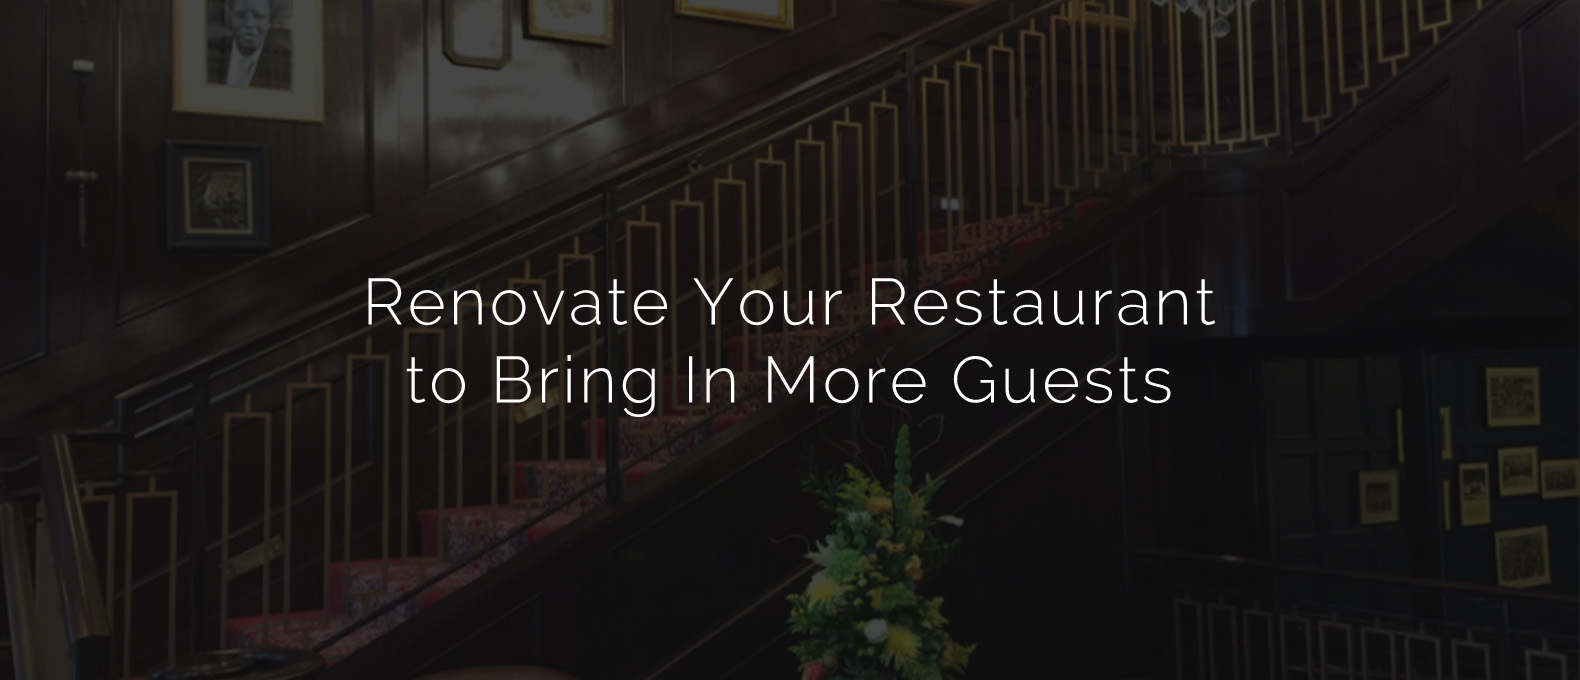 Renovate Your Restuarant to Bring in More Guests - Rare Steakhouse background